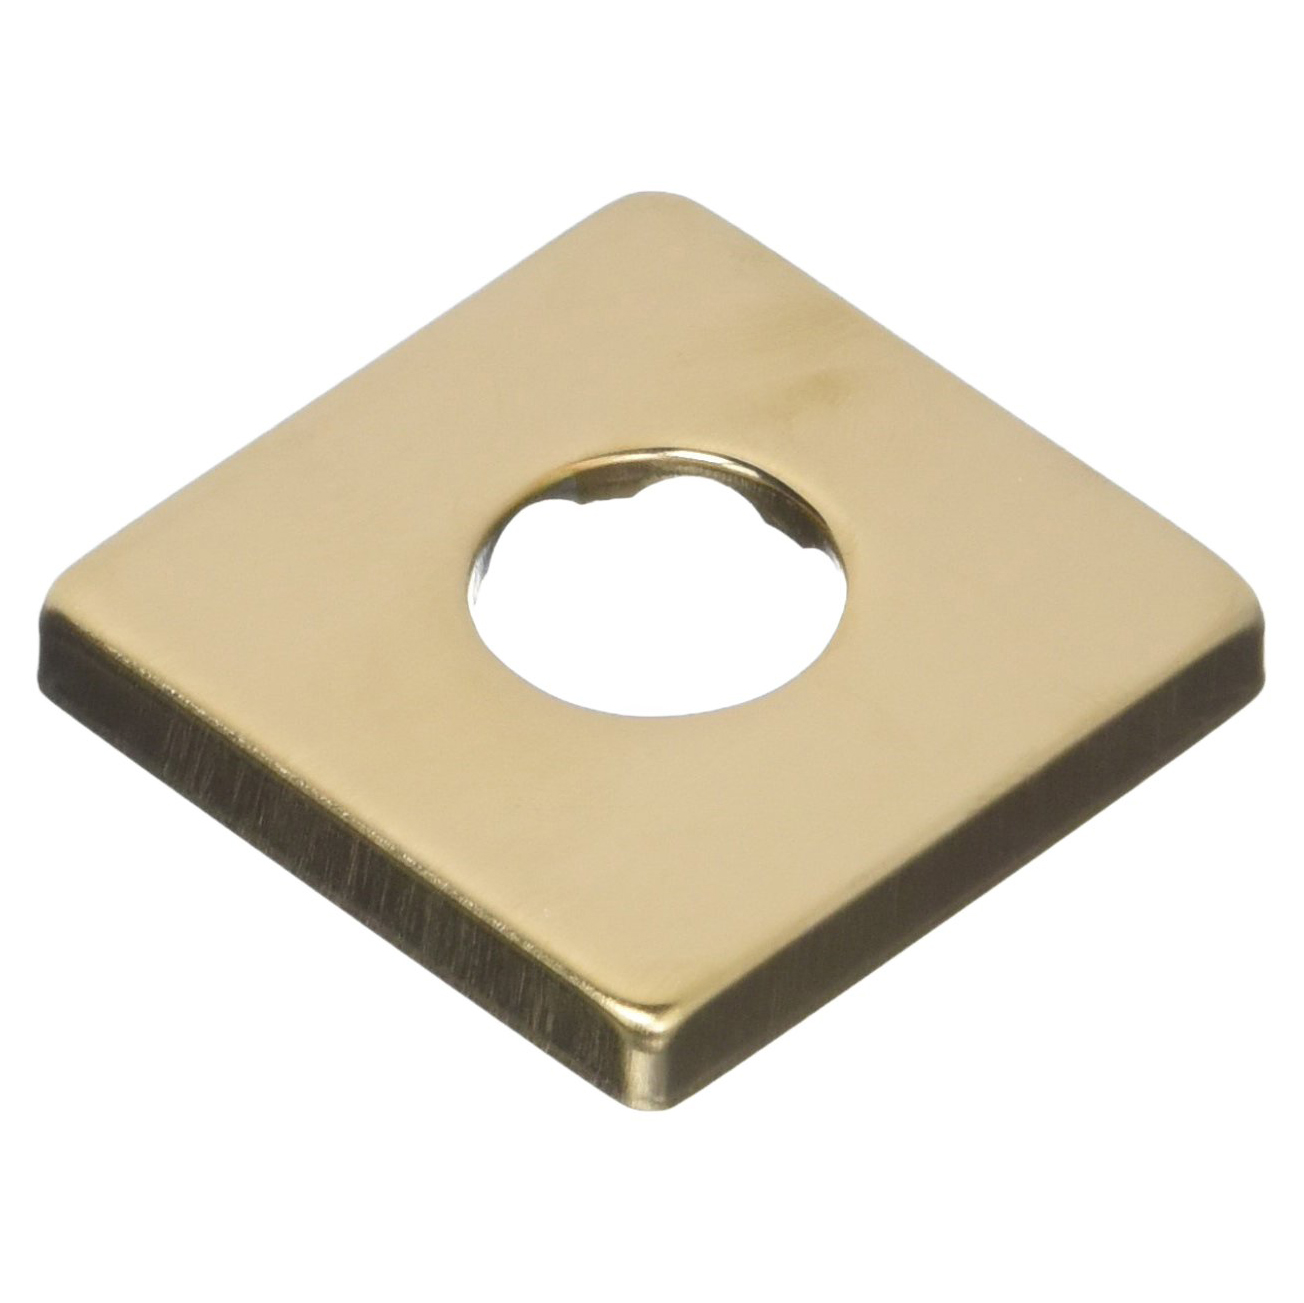 Square Shower Flange for Showerhead in Champagne Bronze